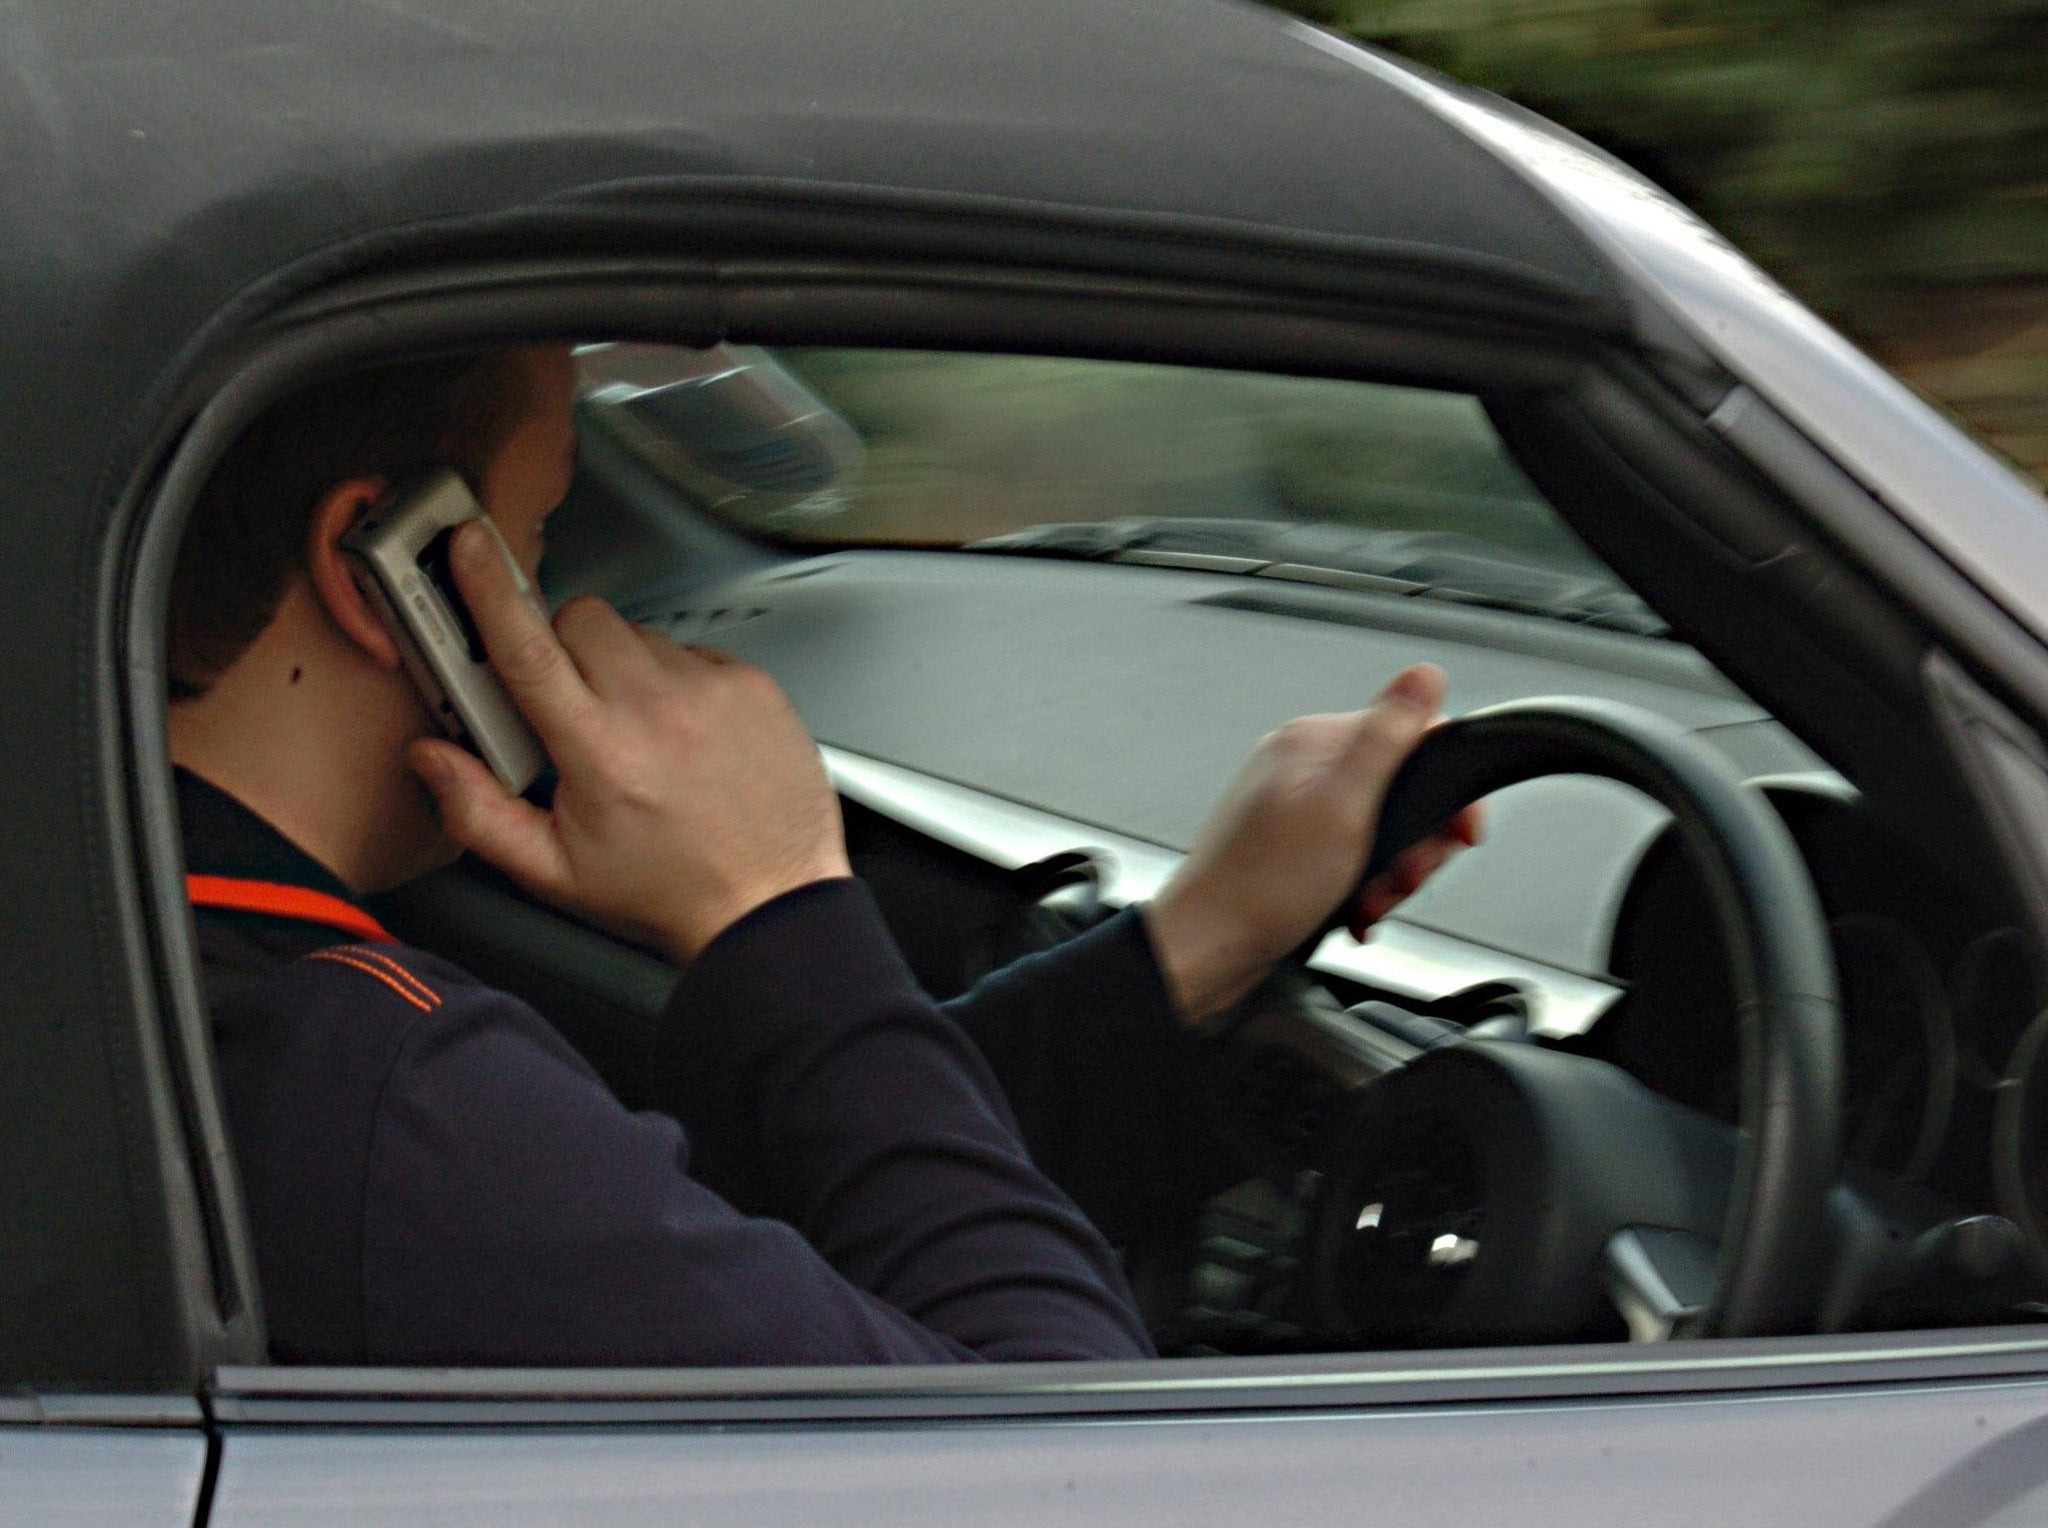 Illegal mobile phone use by drivers is rising, according to new research